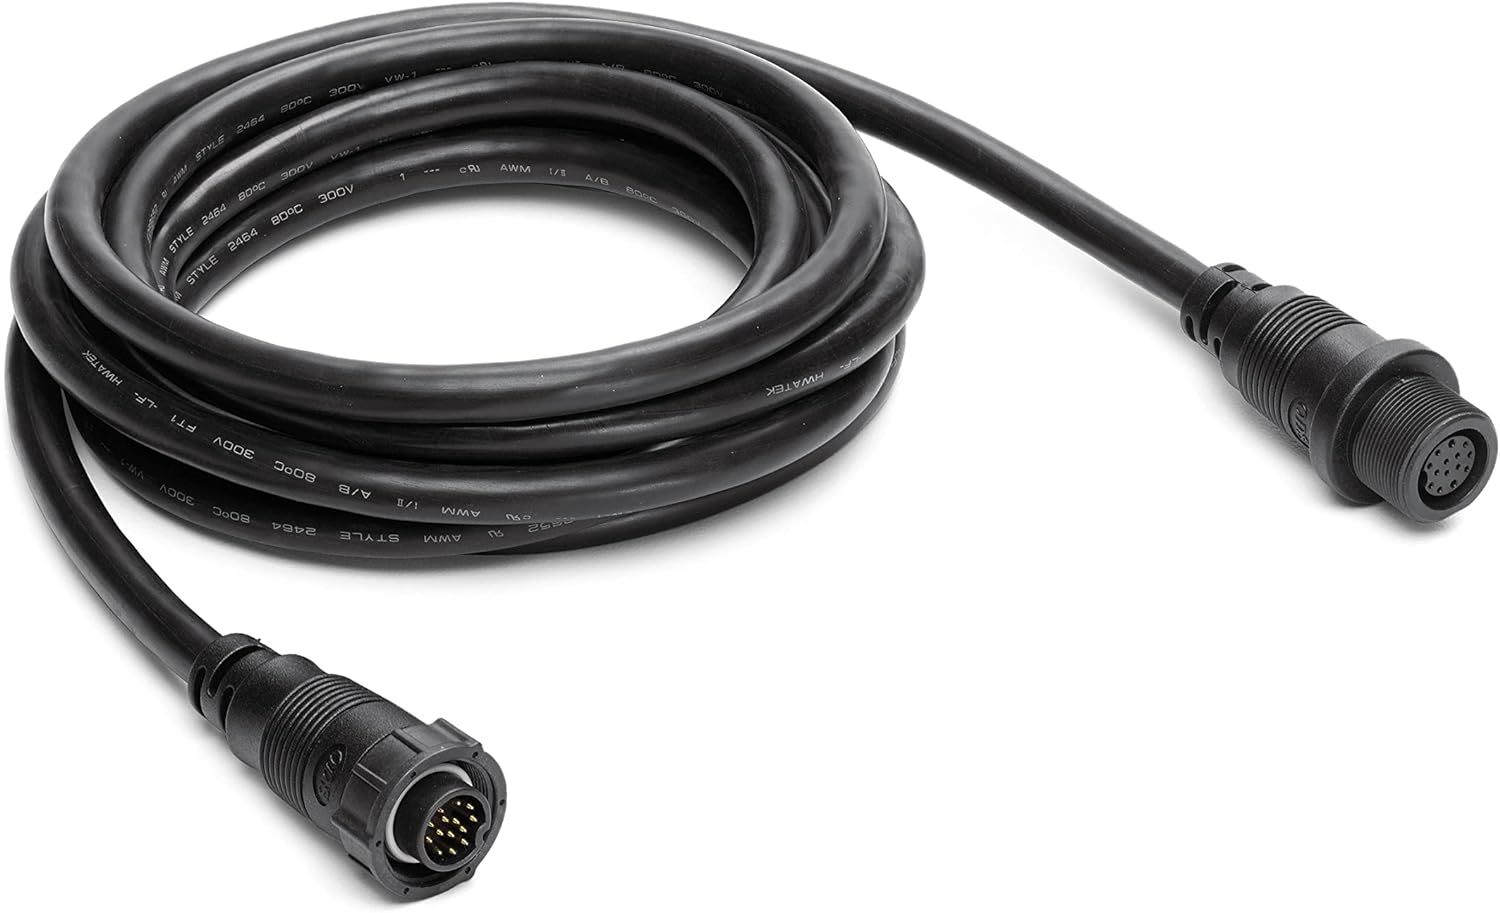 Humminbird 720106-1 EC M3 14W10 APEX And SOLIX Transducer Extension Cable Review